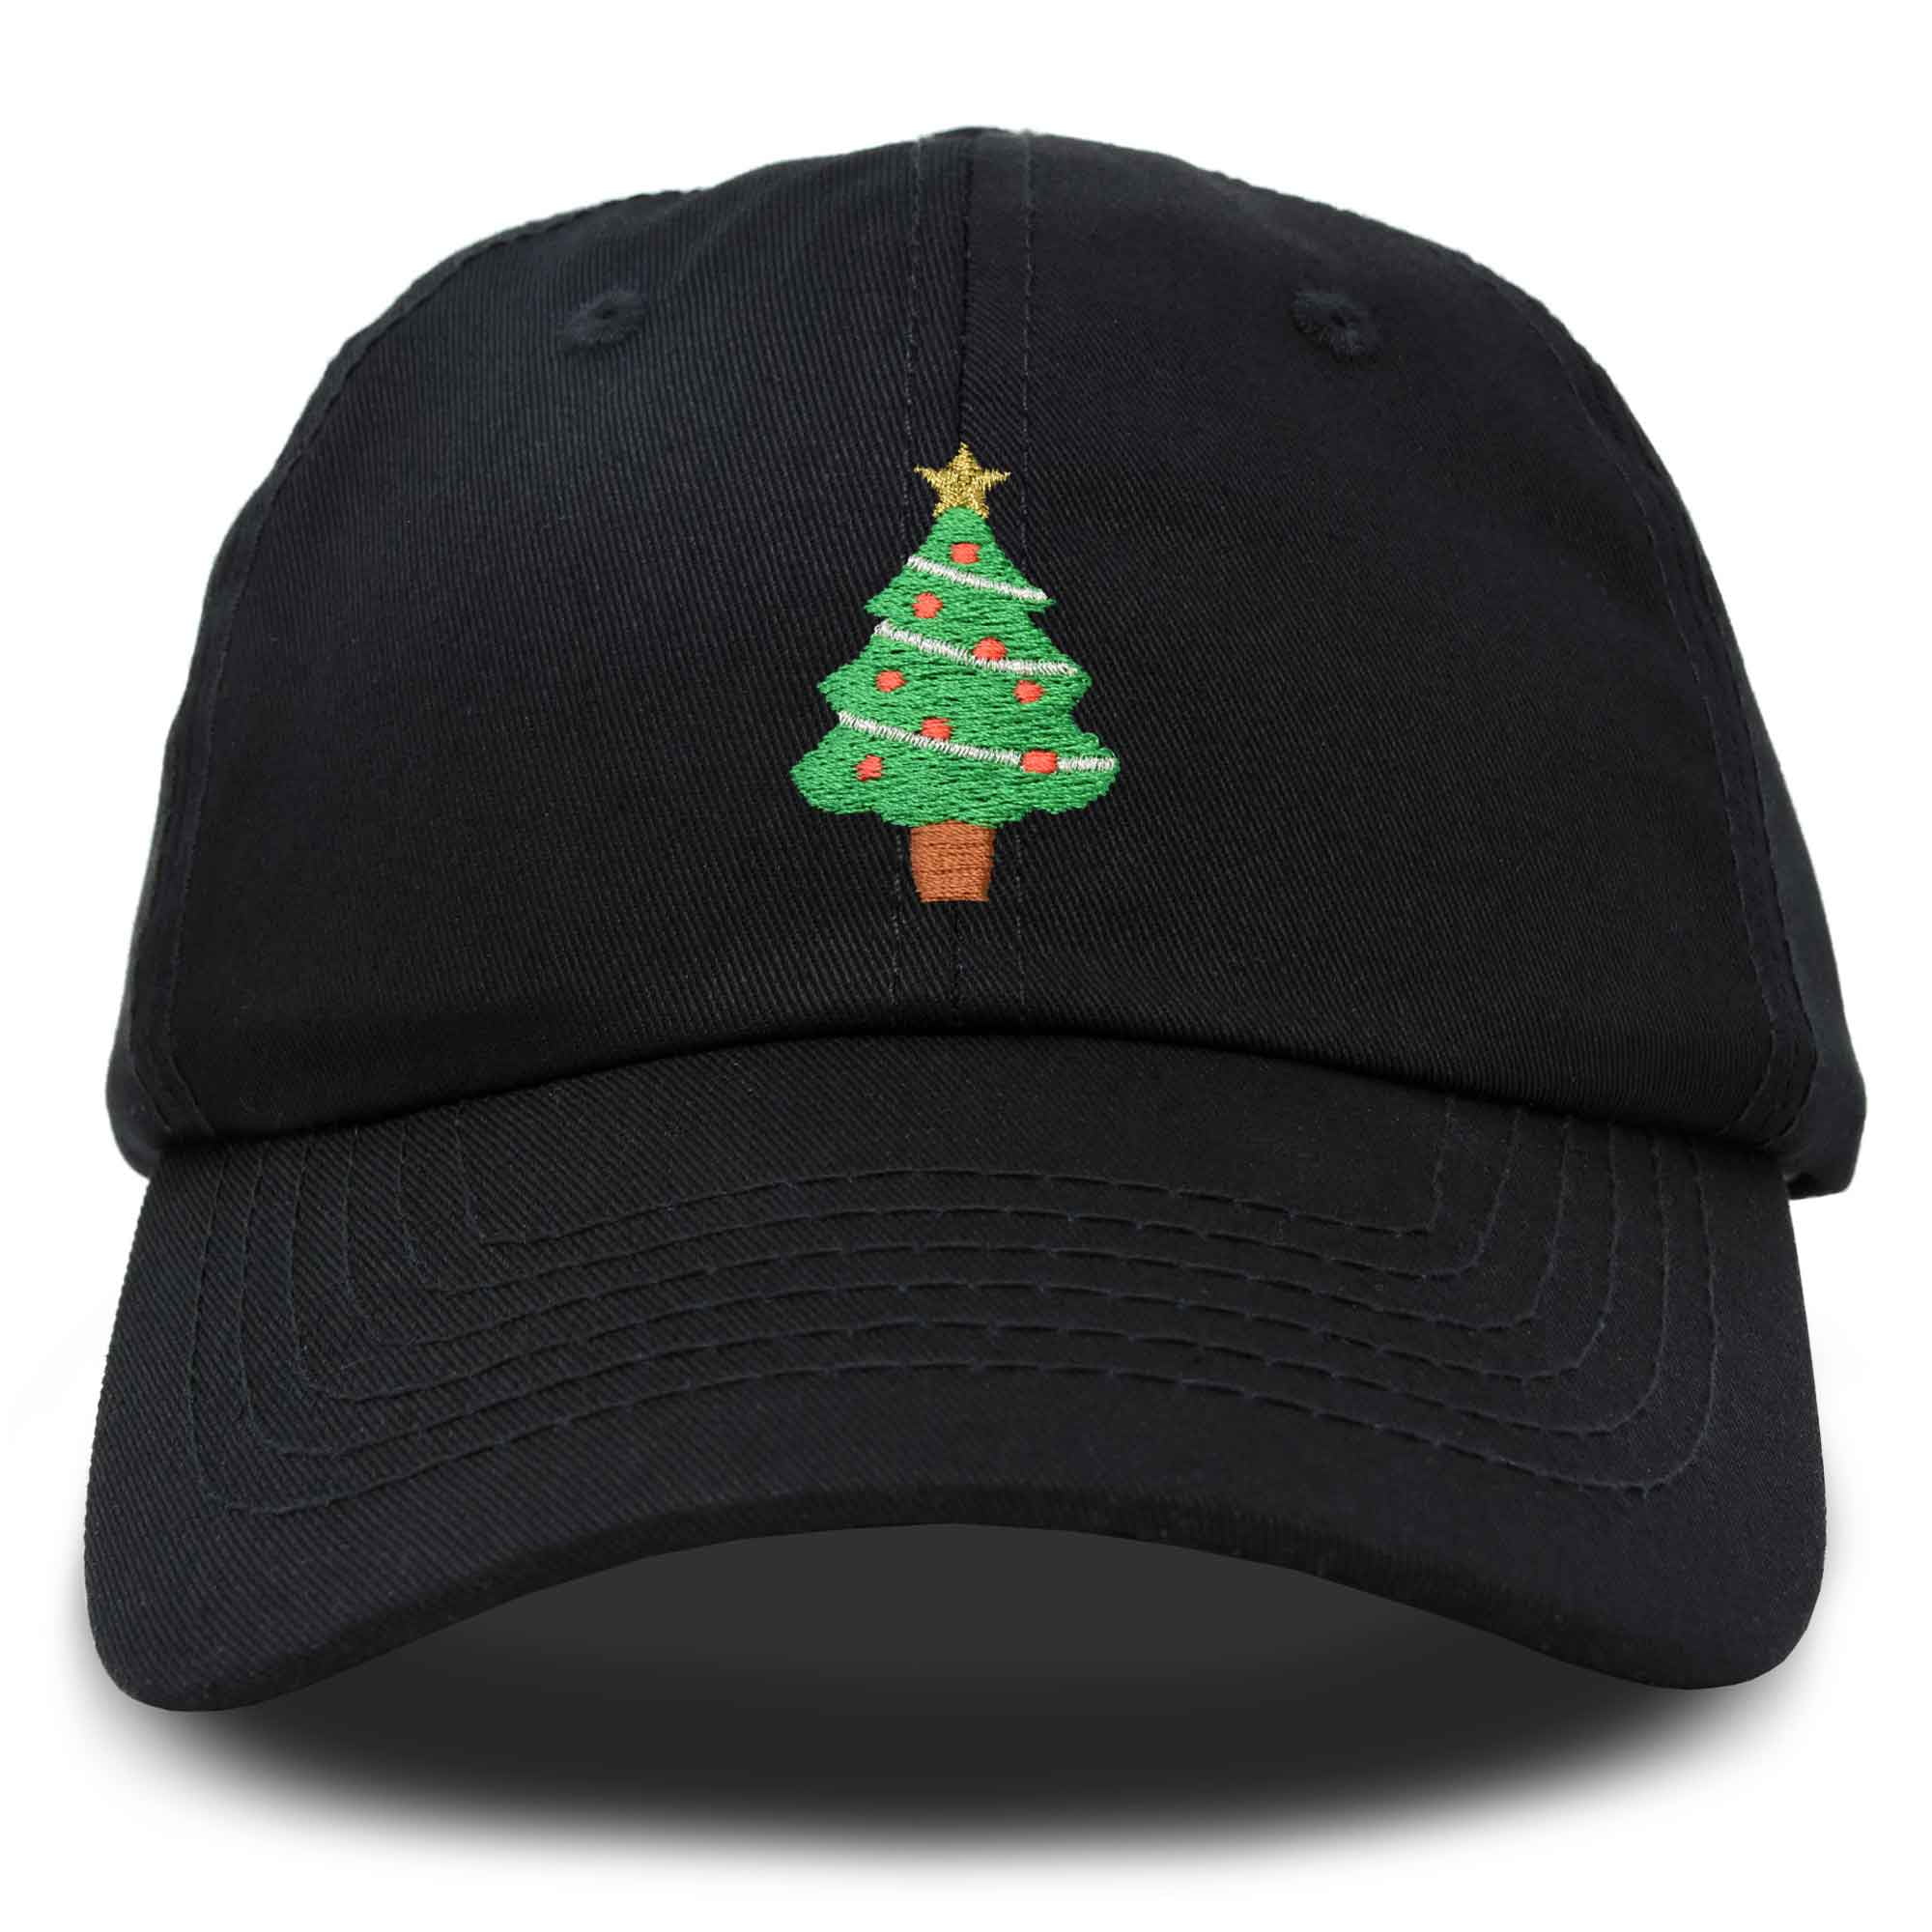 Winter Pine Tree Blue Background Baseball Cap Sun Hat Fashion Hats Quick Drying Mesh Fitness Hat Sports Outdoor 